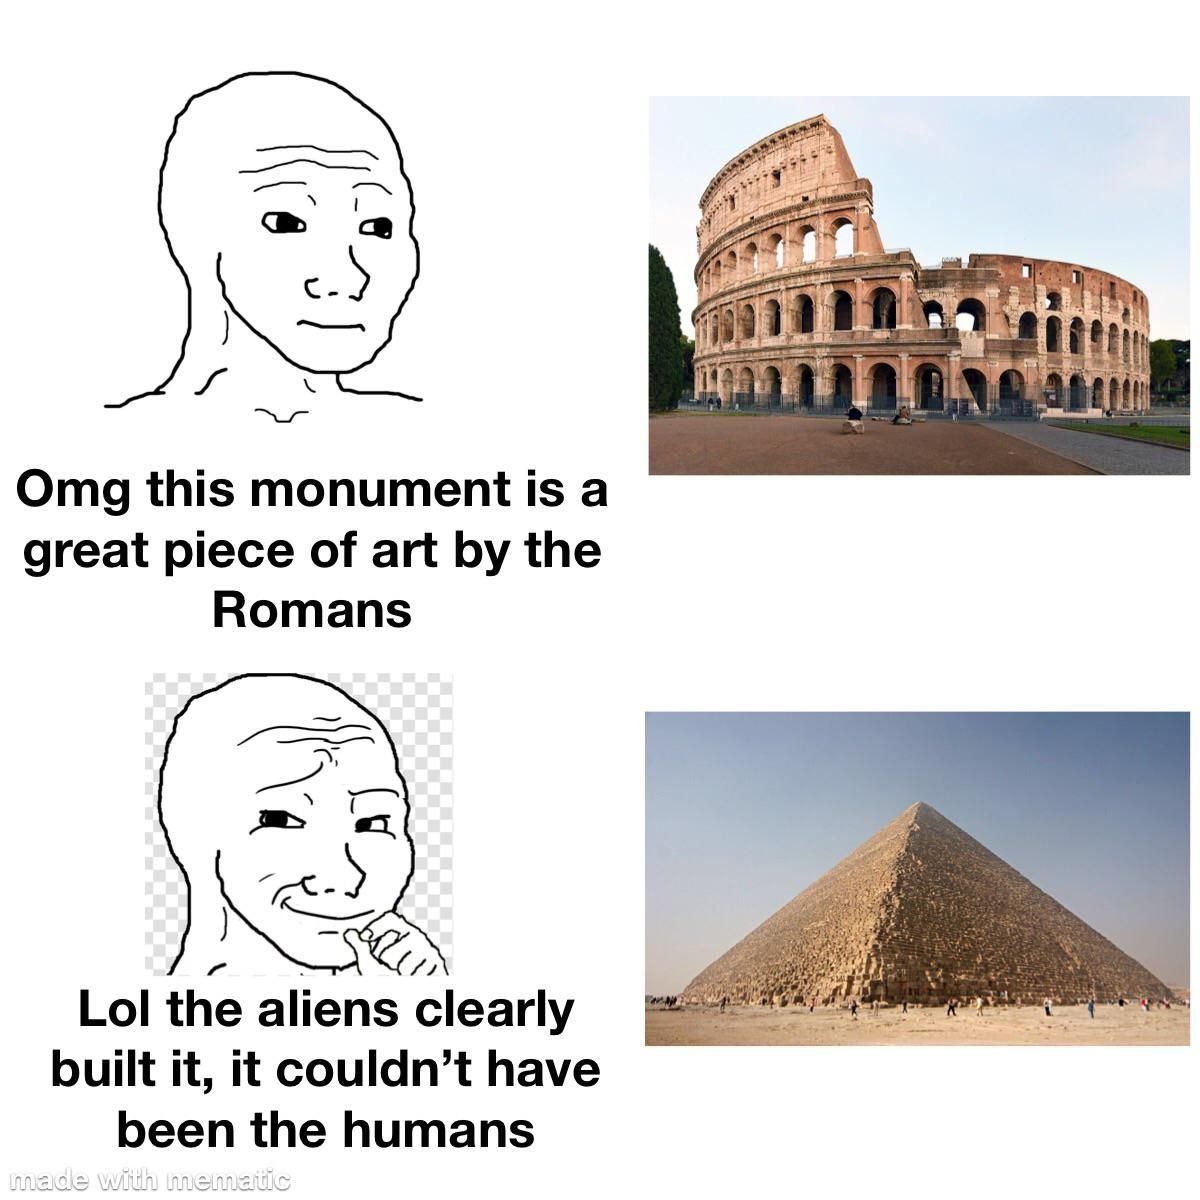 But the pyramids were definitely built by the aliens!